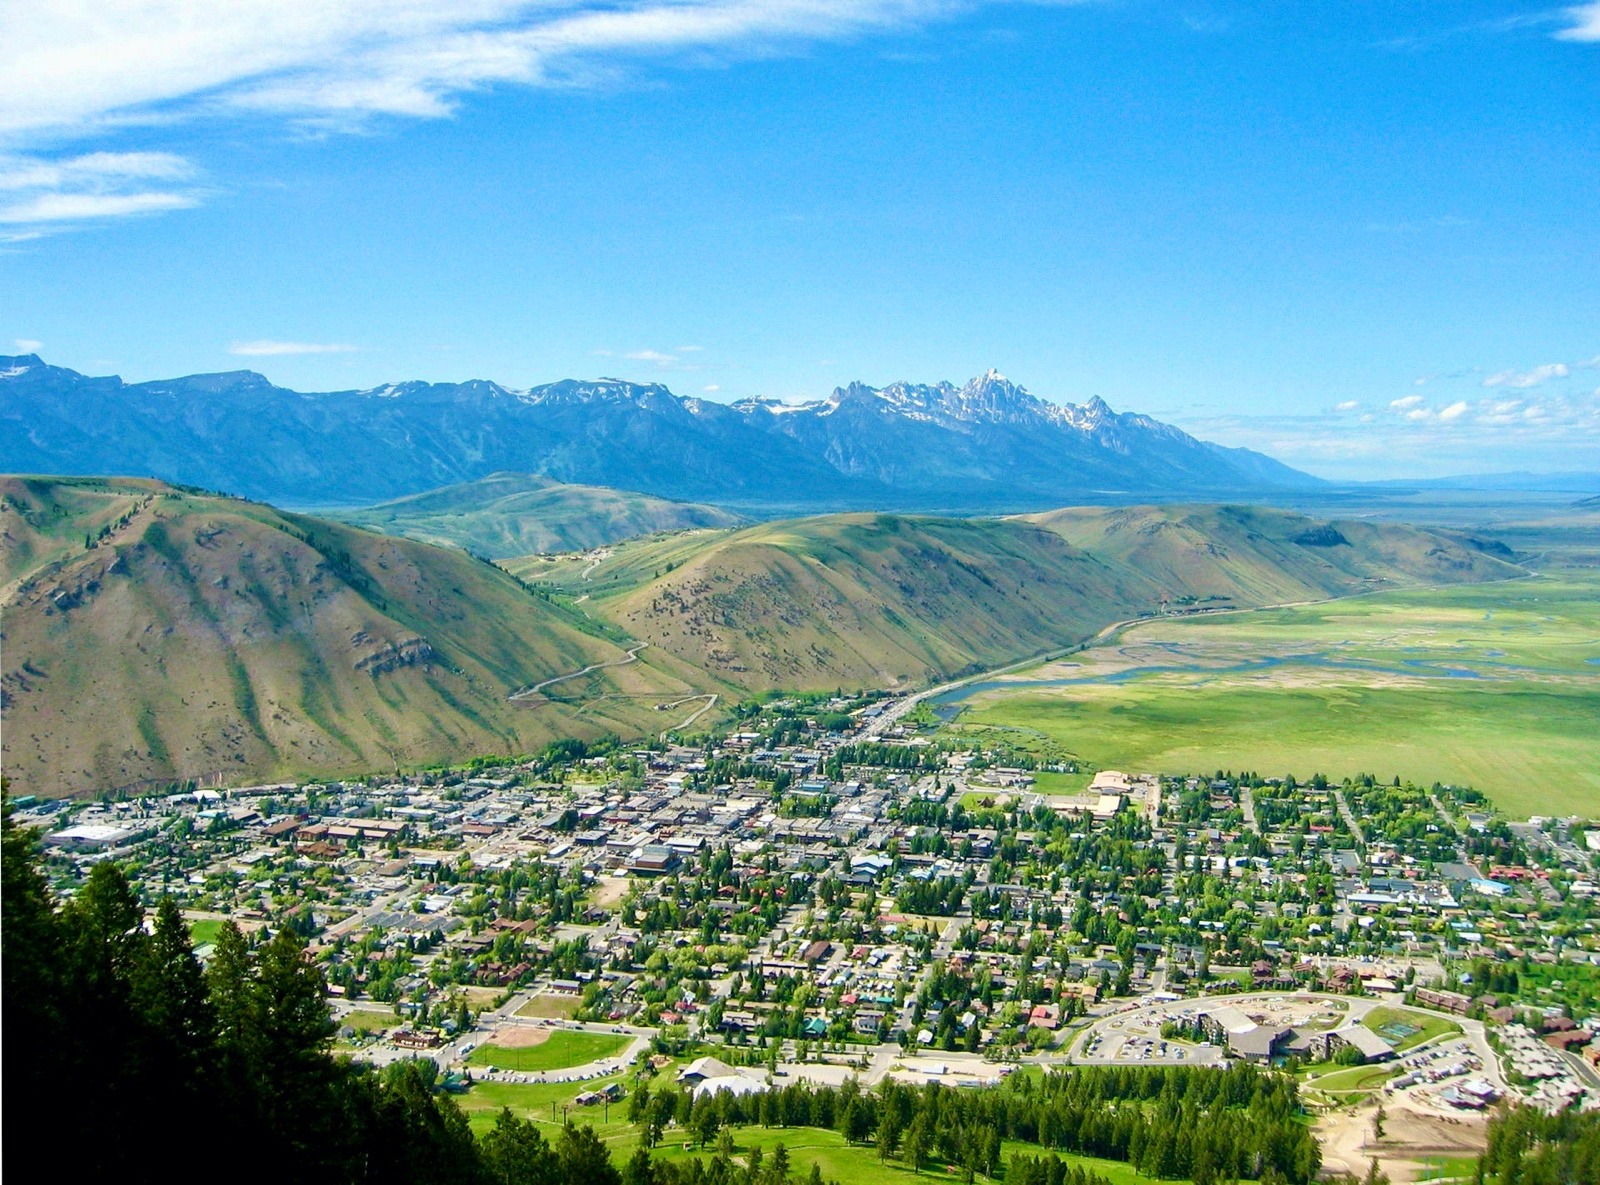 A view of the town of Jackson, Wyoming looking northward from the top of Snow King toward the Tetons and Grand Teton National Park in the distance. Photo courtesy Wikipedia. 